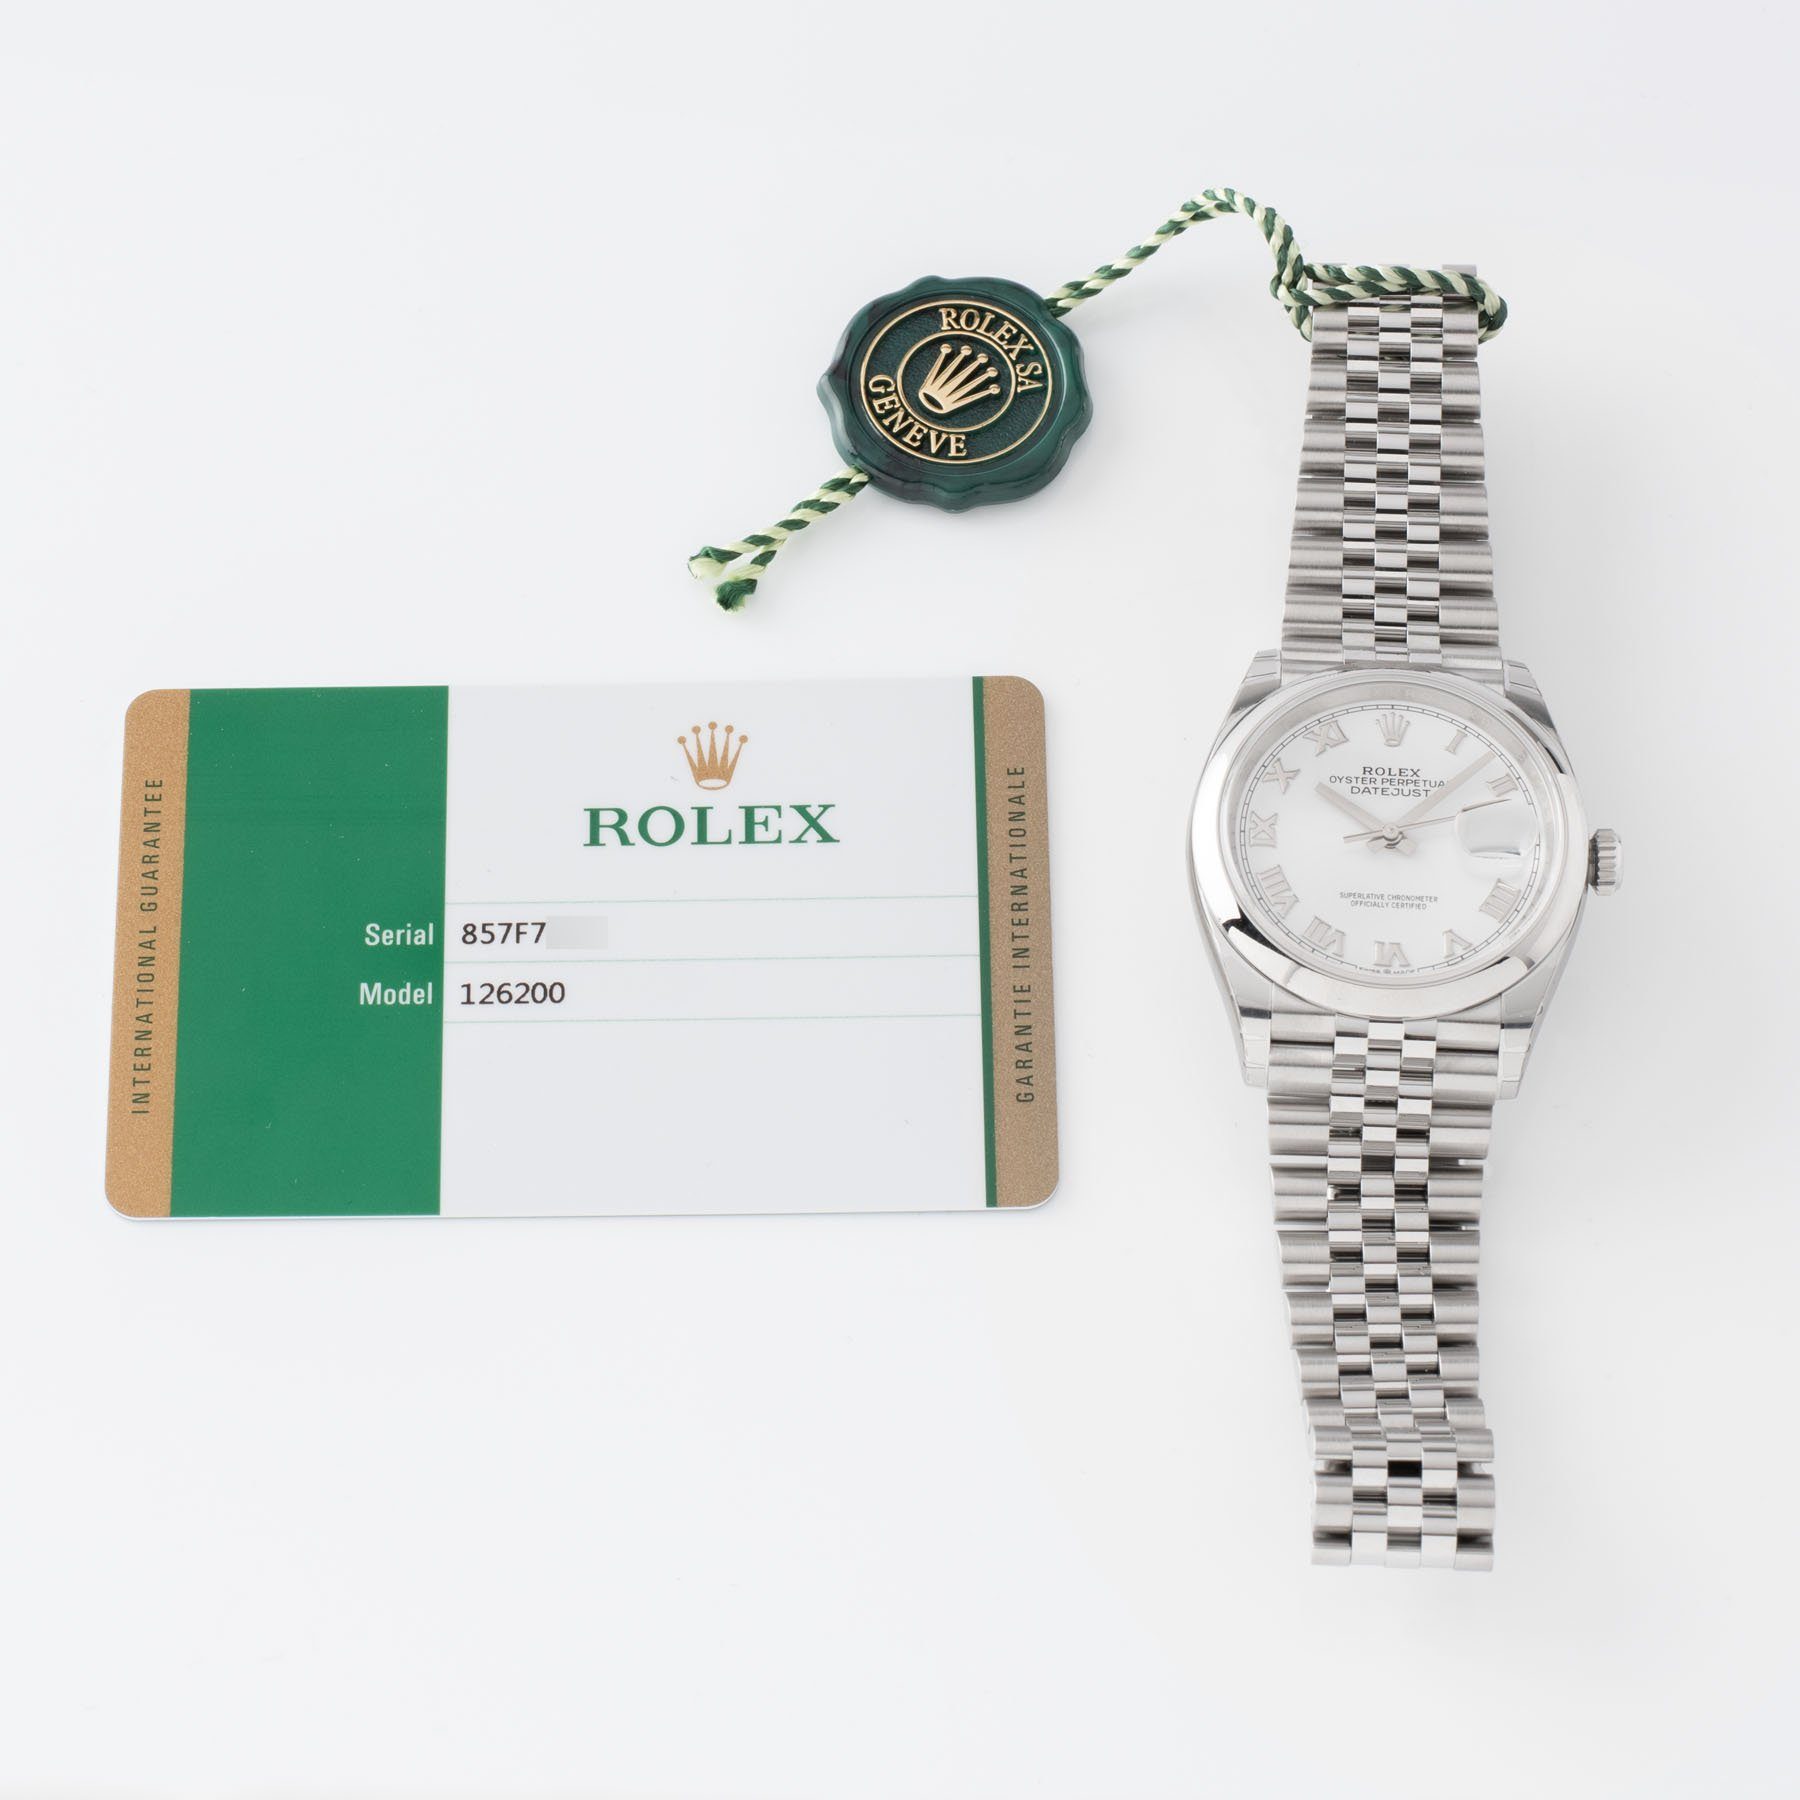 Rolex Datejust White Dial 126200 with Original warranty card and hang tags